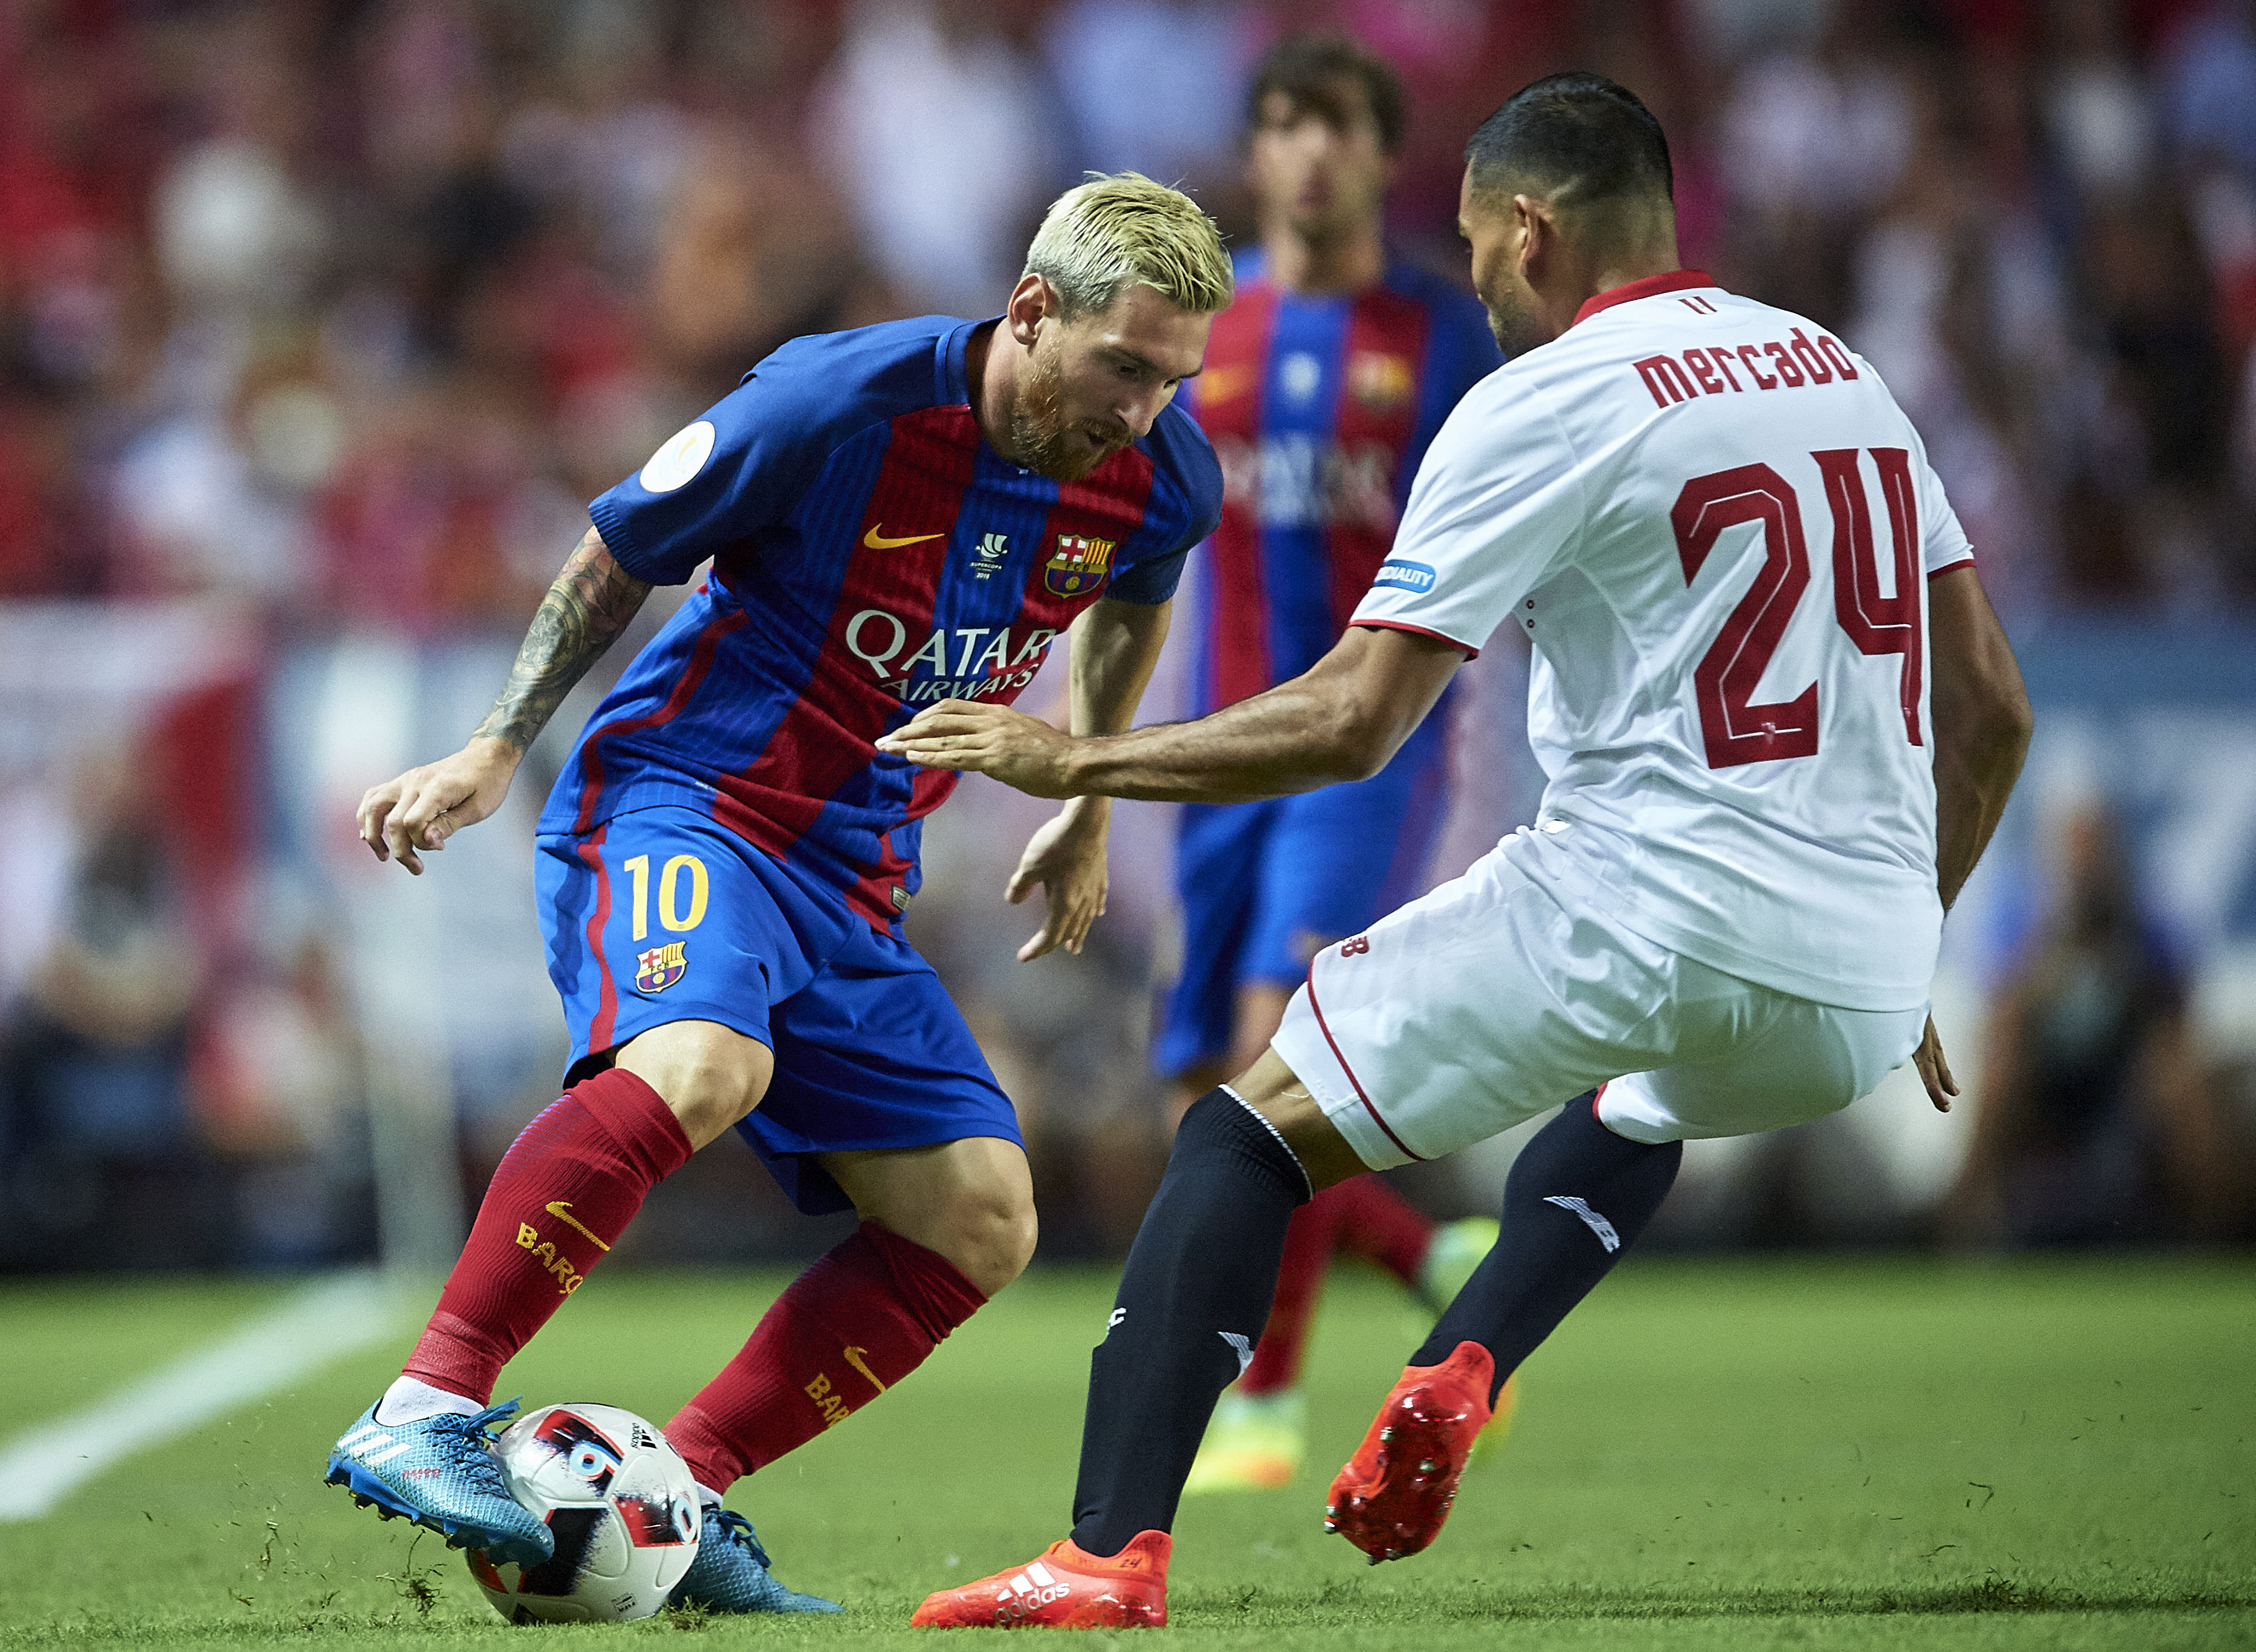 SEVILLE, SPAIN - AUGUST 14: Lionel Messi of FC Barcelona (L) being followed by Gabriel Mercado of Sevilla FC (R) during the match between Sevilla FC vs FC Barcelona as part of the Spanish Super Cup Final 1st Leg at Estadio Ramon Sanchez Pizjuan on August 14, 2016 in Seville, Spain. (Photo by Aitor Alcalde/Getty Images)